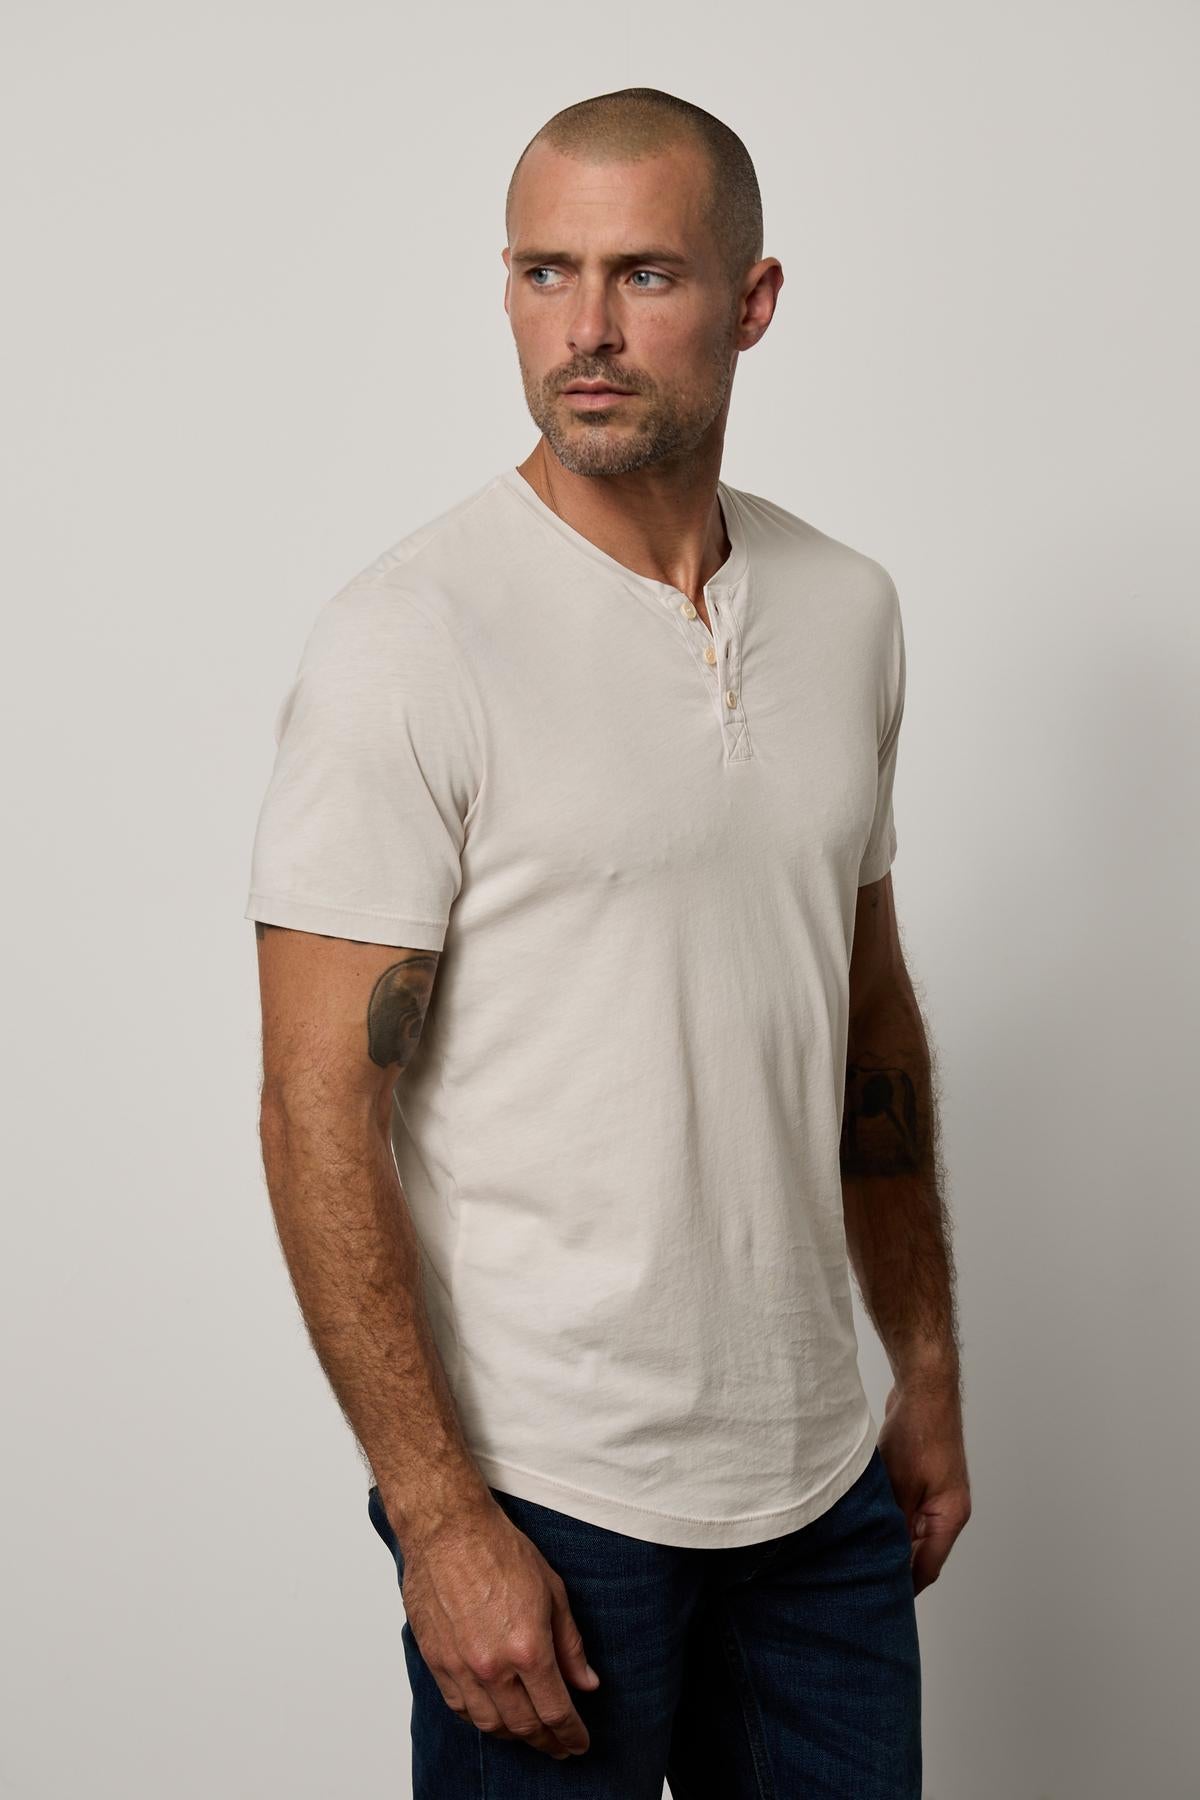 A man with a short haircut and tattoos on his arms stands facing left in a Velvet by Graham & Spencer Fulton Henley tee against a white background.-36890721976513